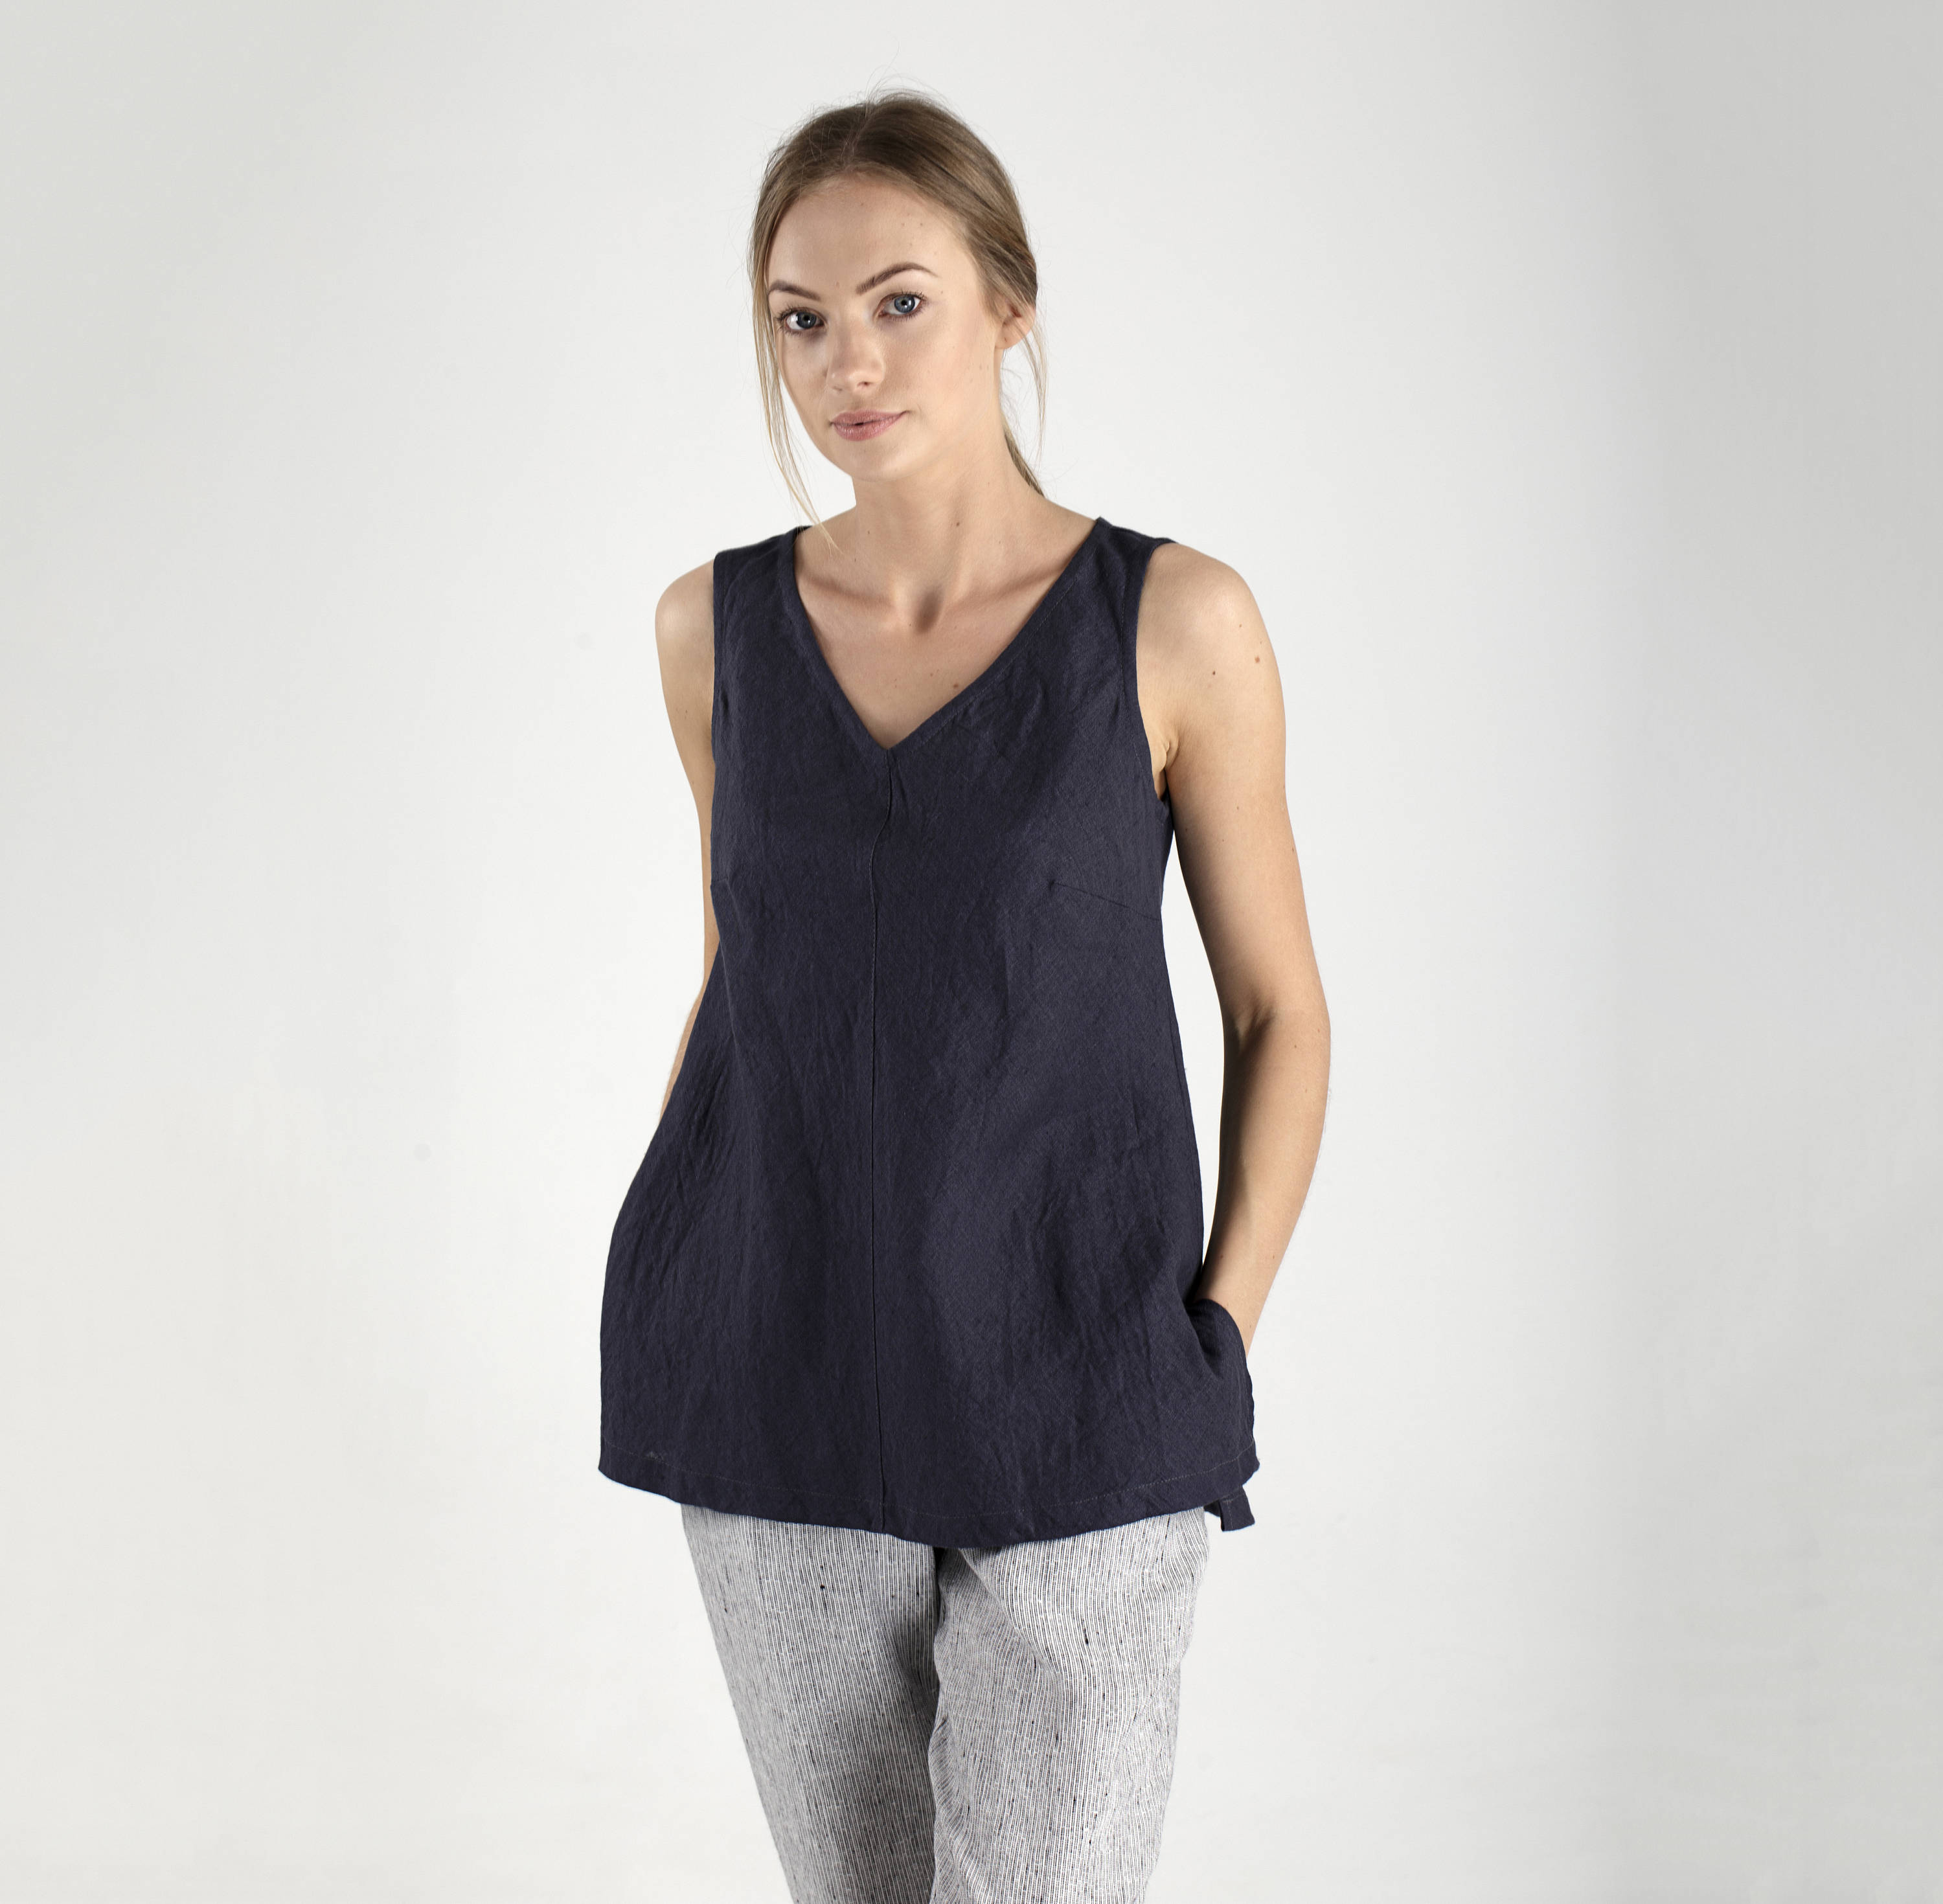 Linen Blouse / Charcoal Linen Tank Top With V Neck / Sleeveless